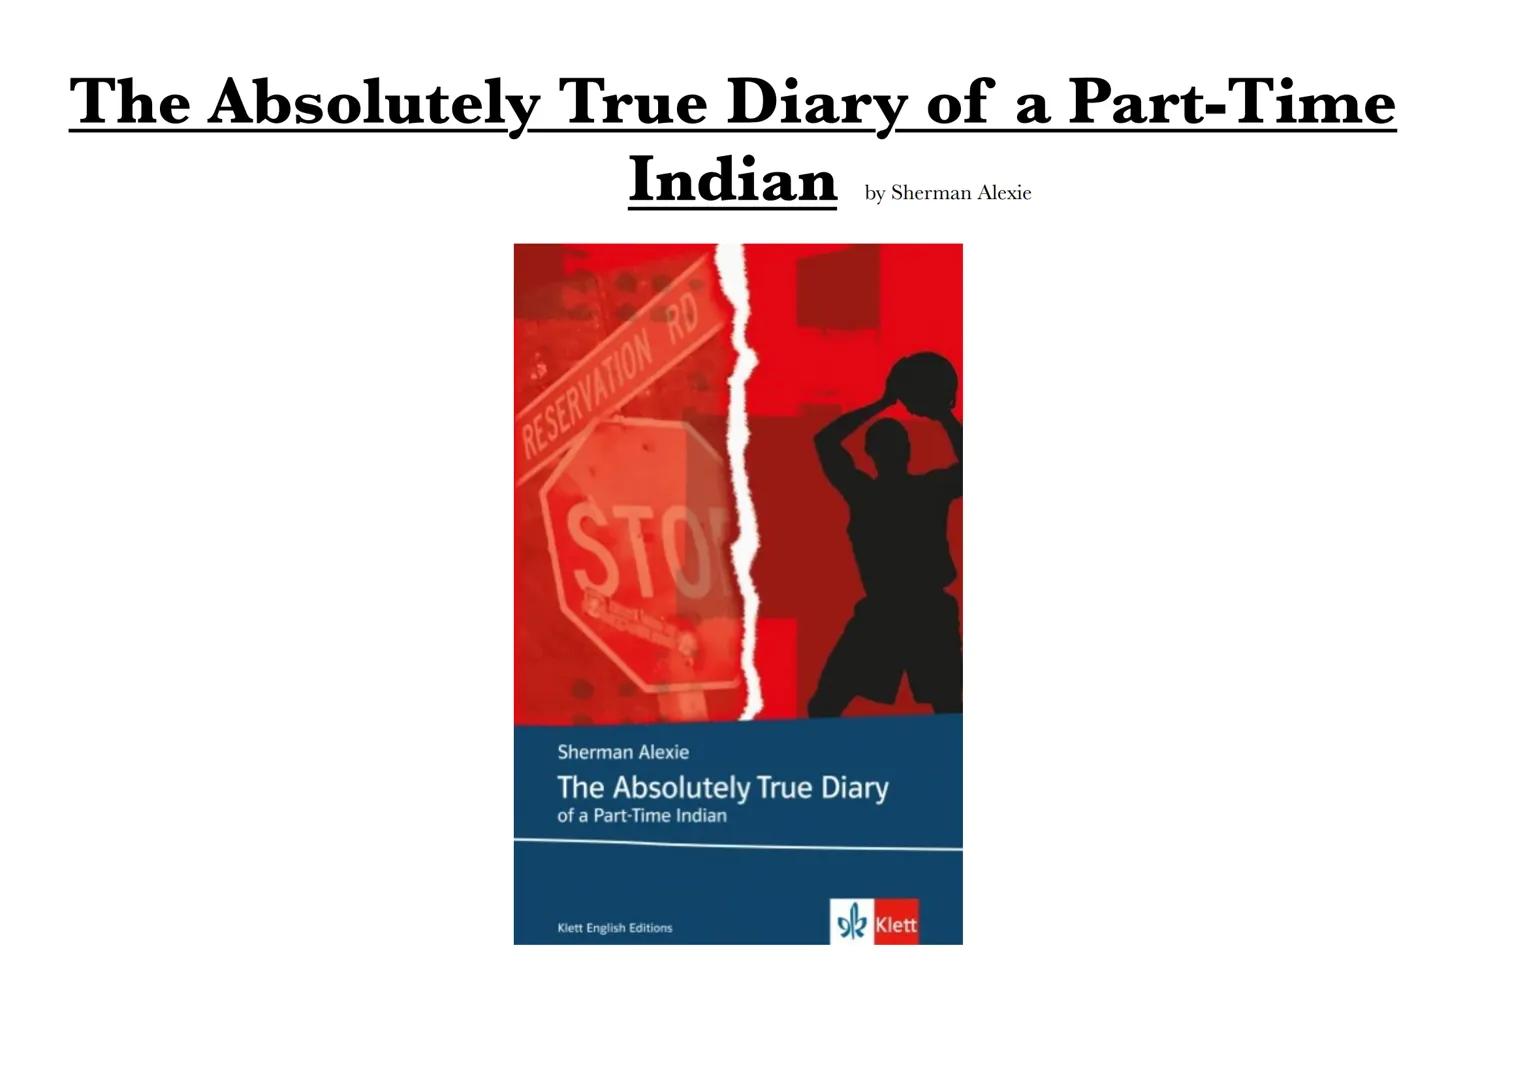 The Absolutely True Diary of a Part-Time
Indian by Sherman Alexie
RESERVATION RD
STOP
Sherman Alexie
The Absolutely True Diary
of a Part-Tim